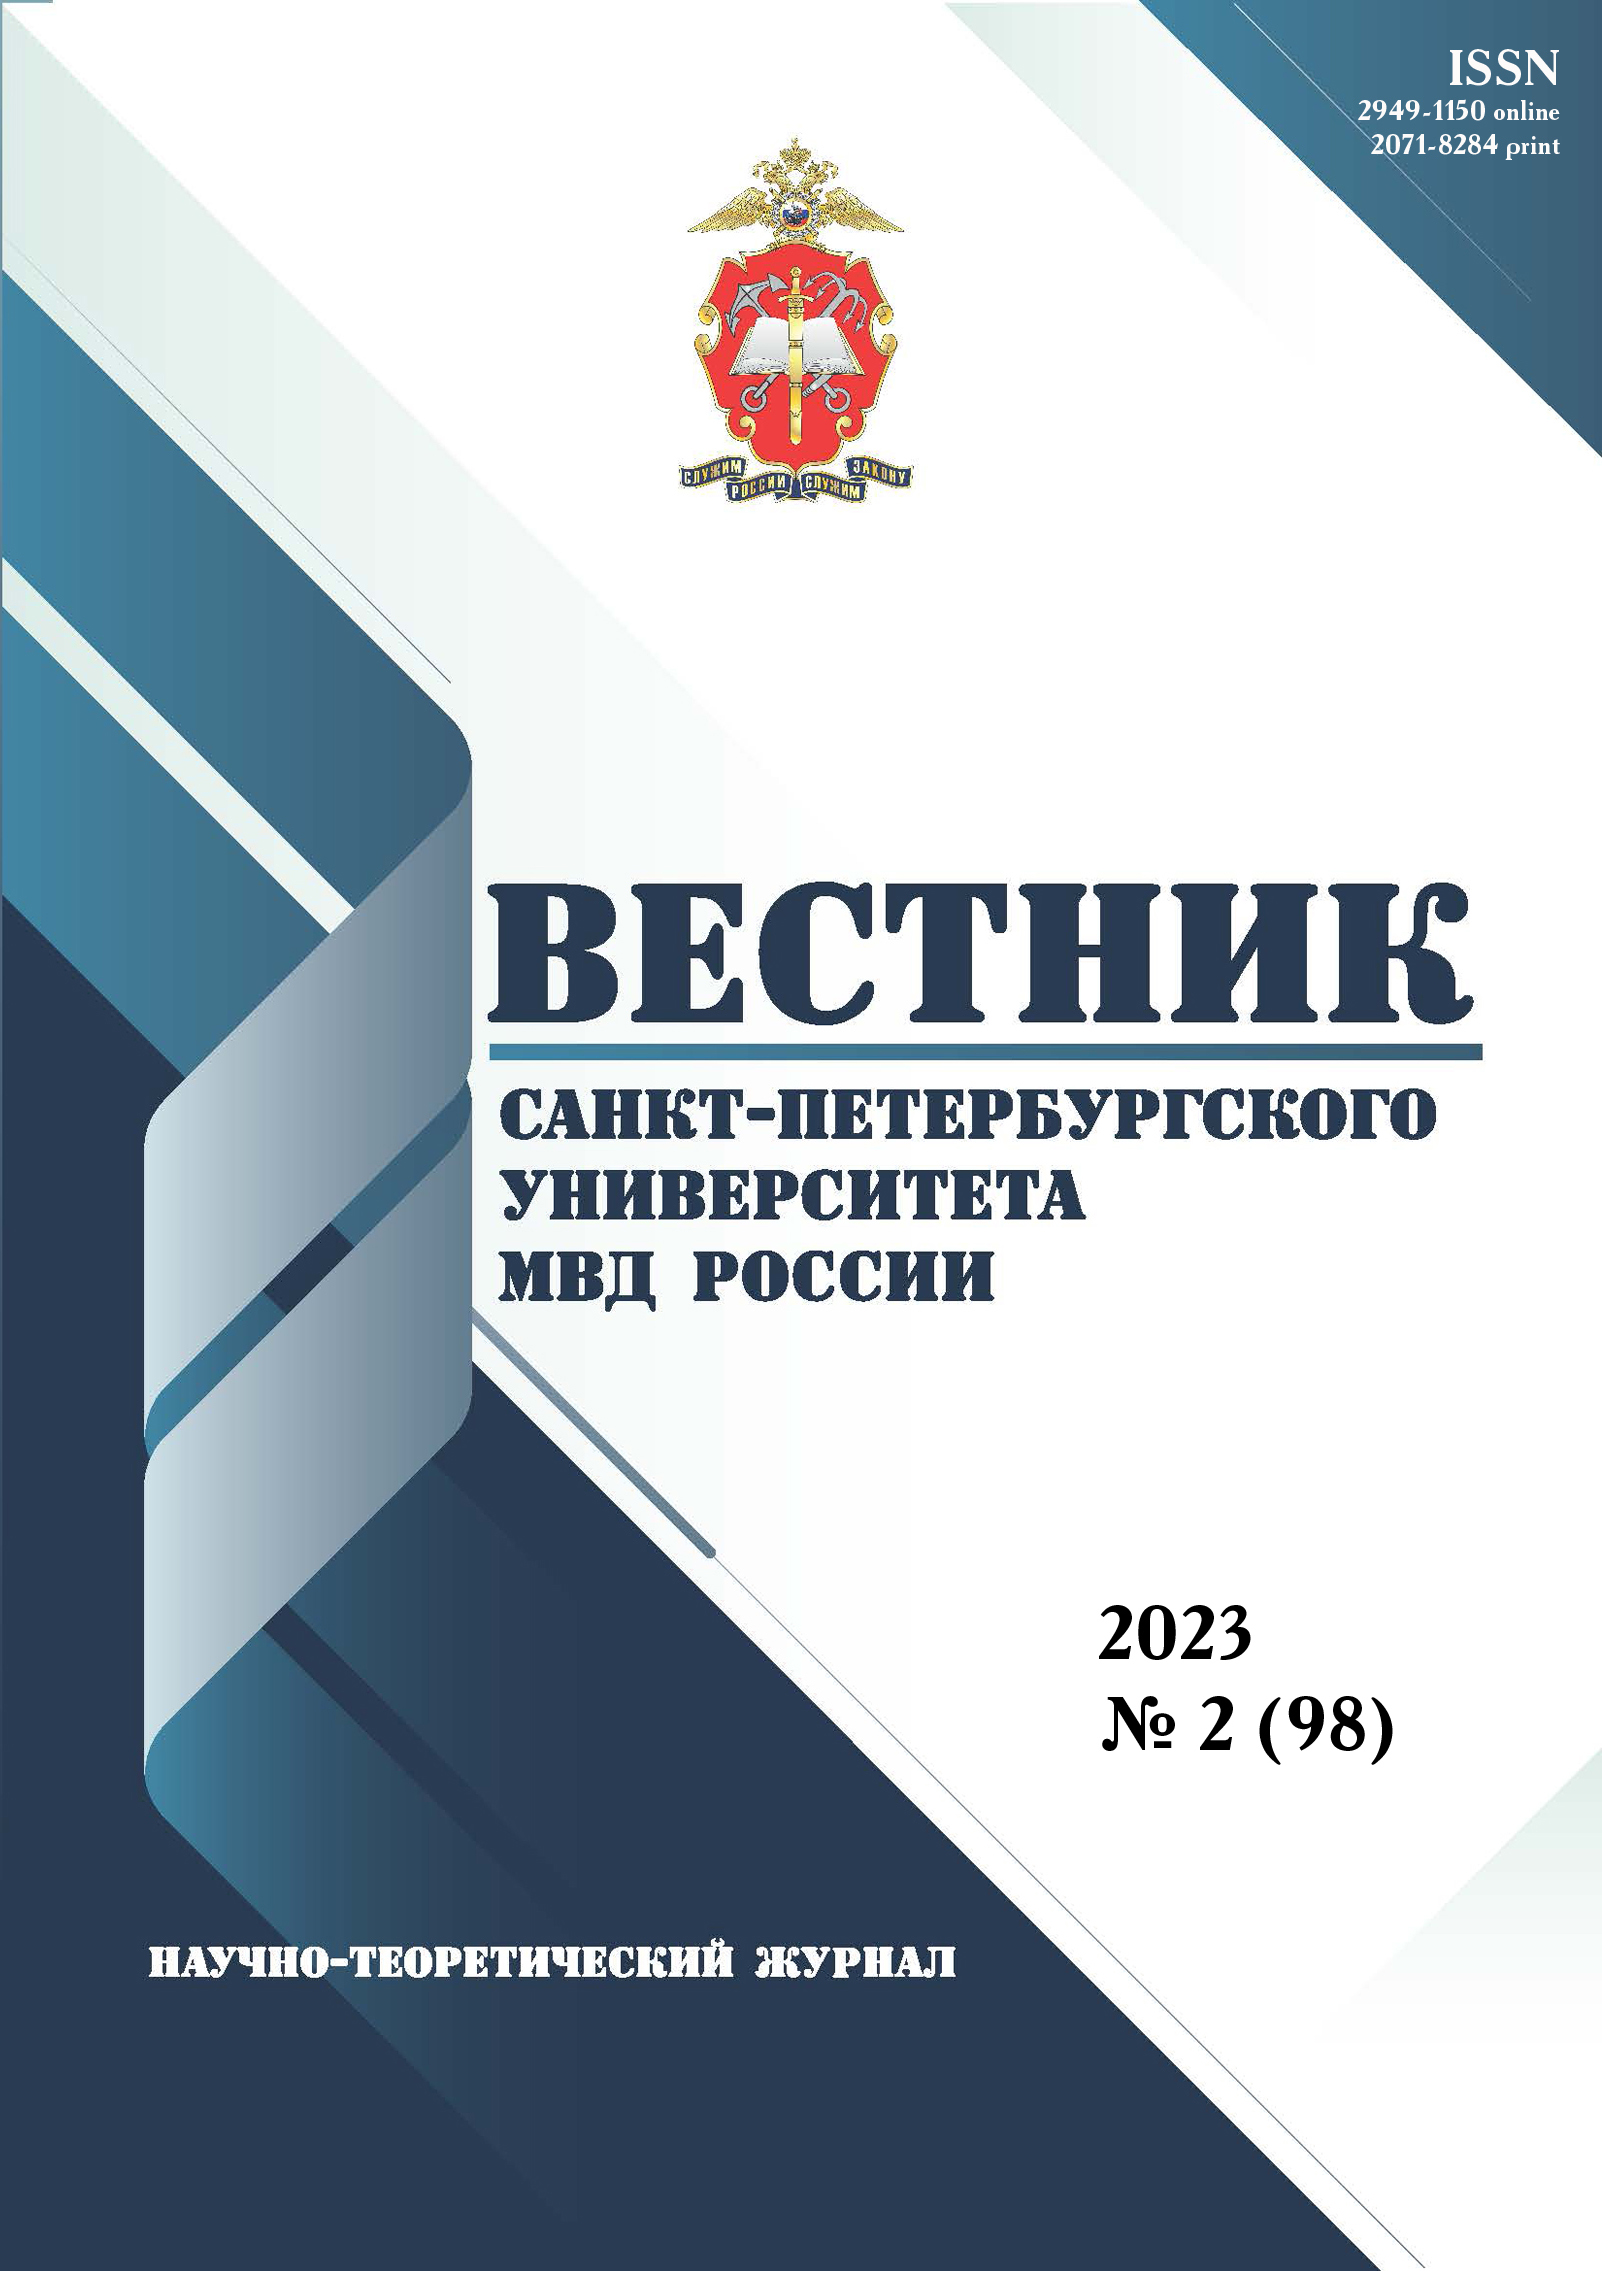                         Preparing cadets of educational institutions of higher education of the Ministry of Internal Affairs of Russia for carrying out operational and service tasks in special conditions
            